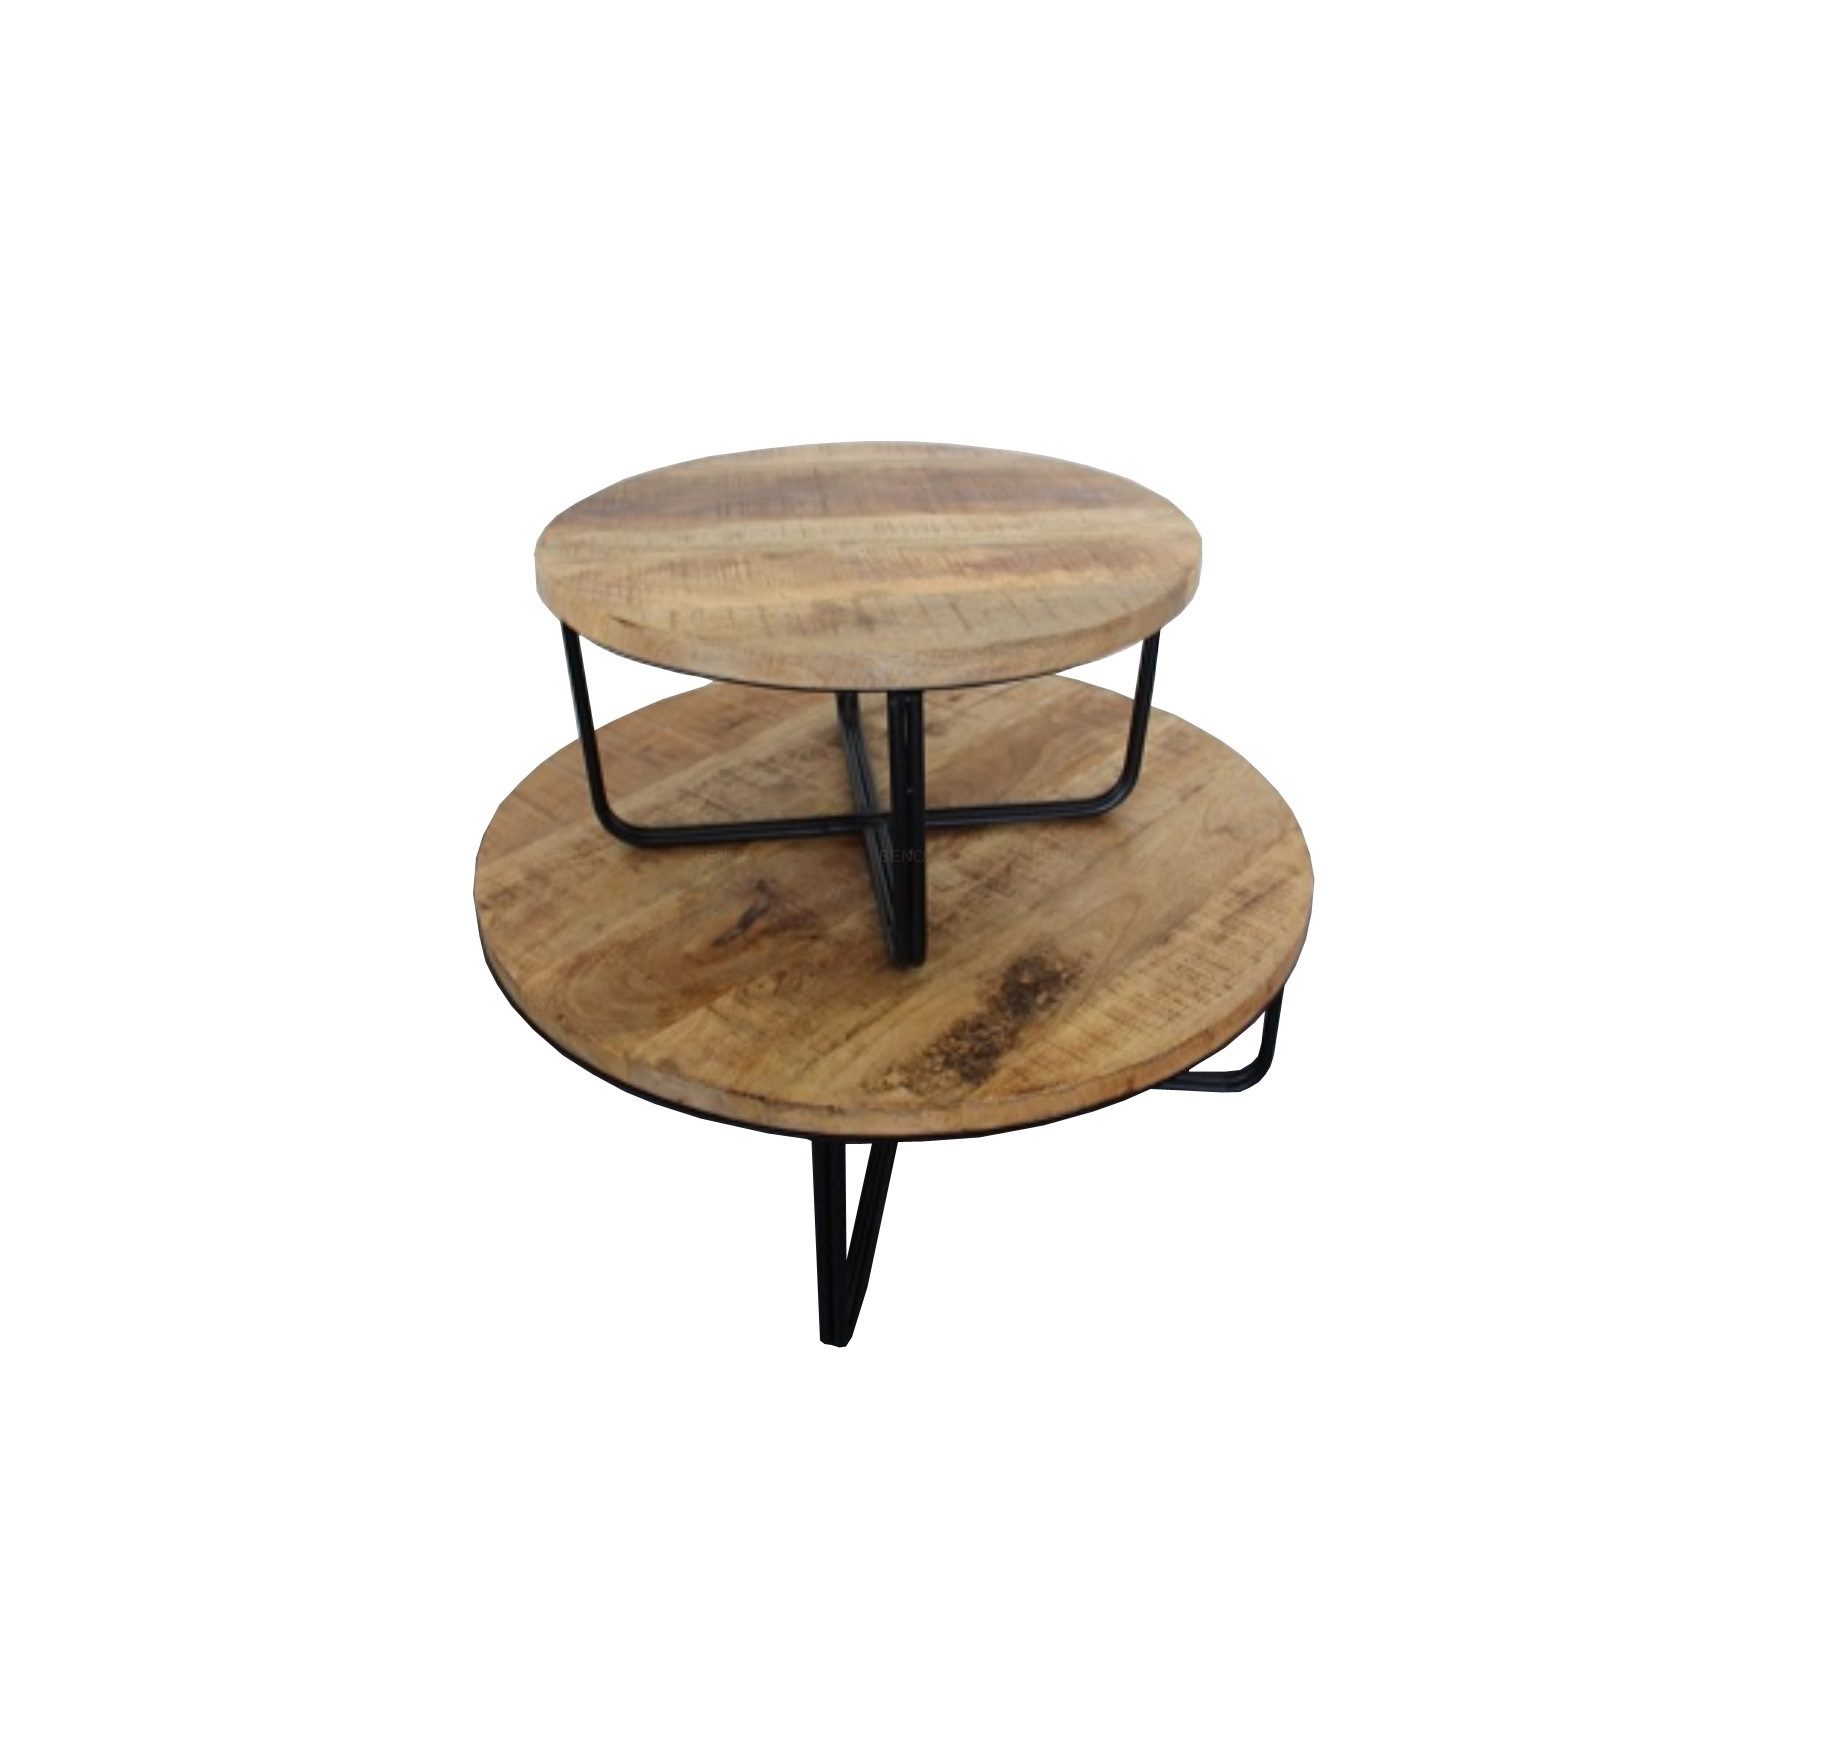 iron-round-coffee-table-natural-finish-set-of-2